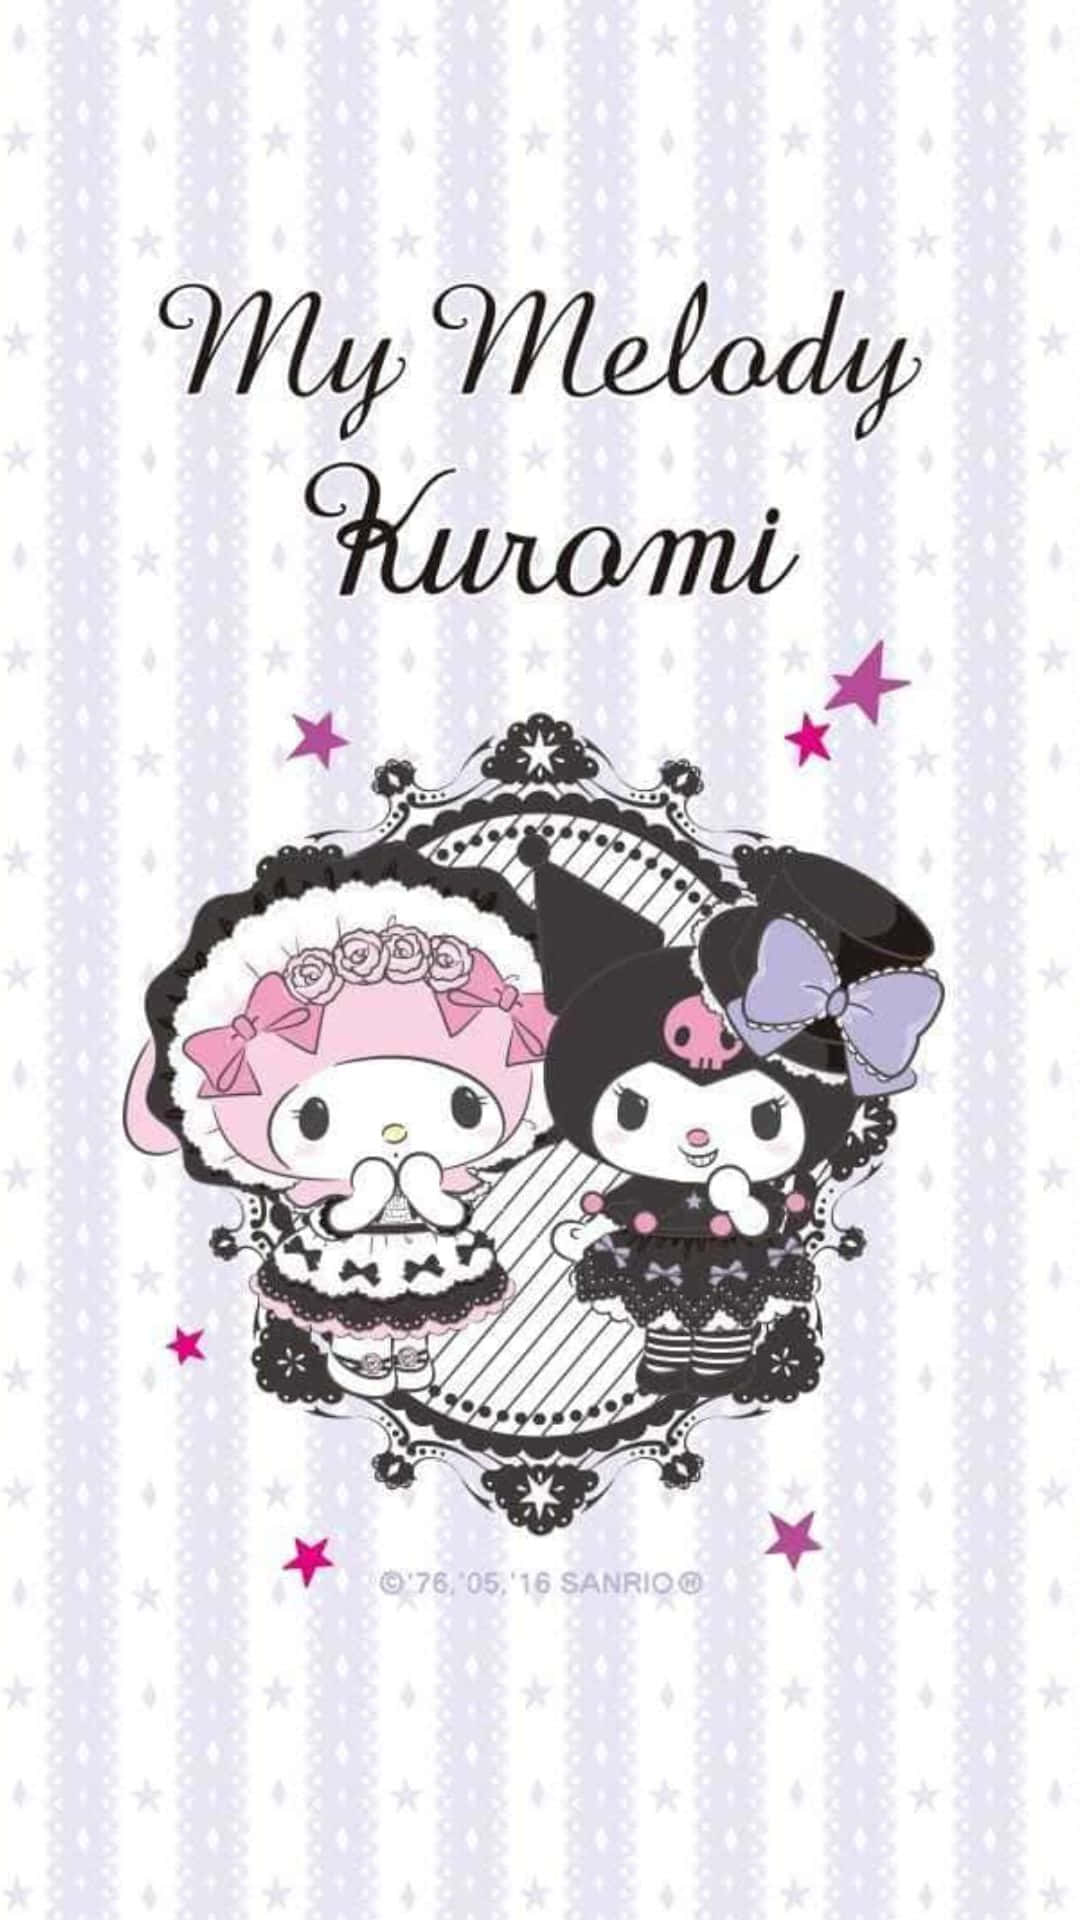 Kuromi and My Melody Sharing a Frame Wallpaper